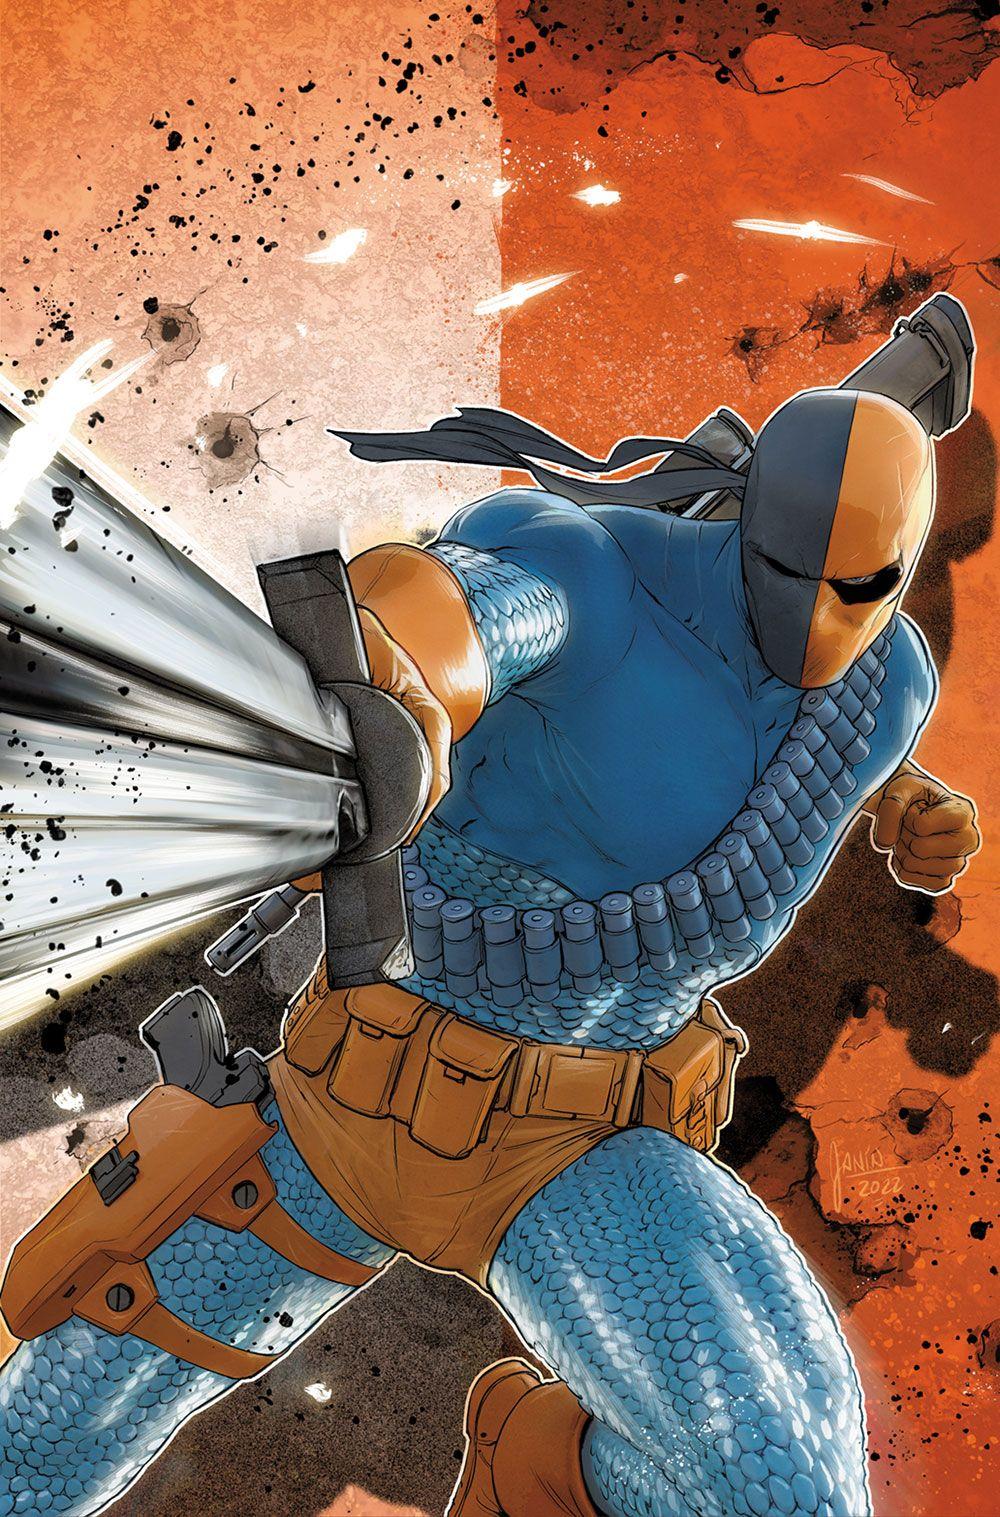 Deathstroke Declares A Shadow War on the DCU in March!